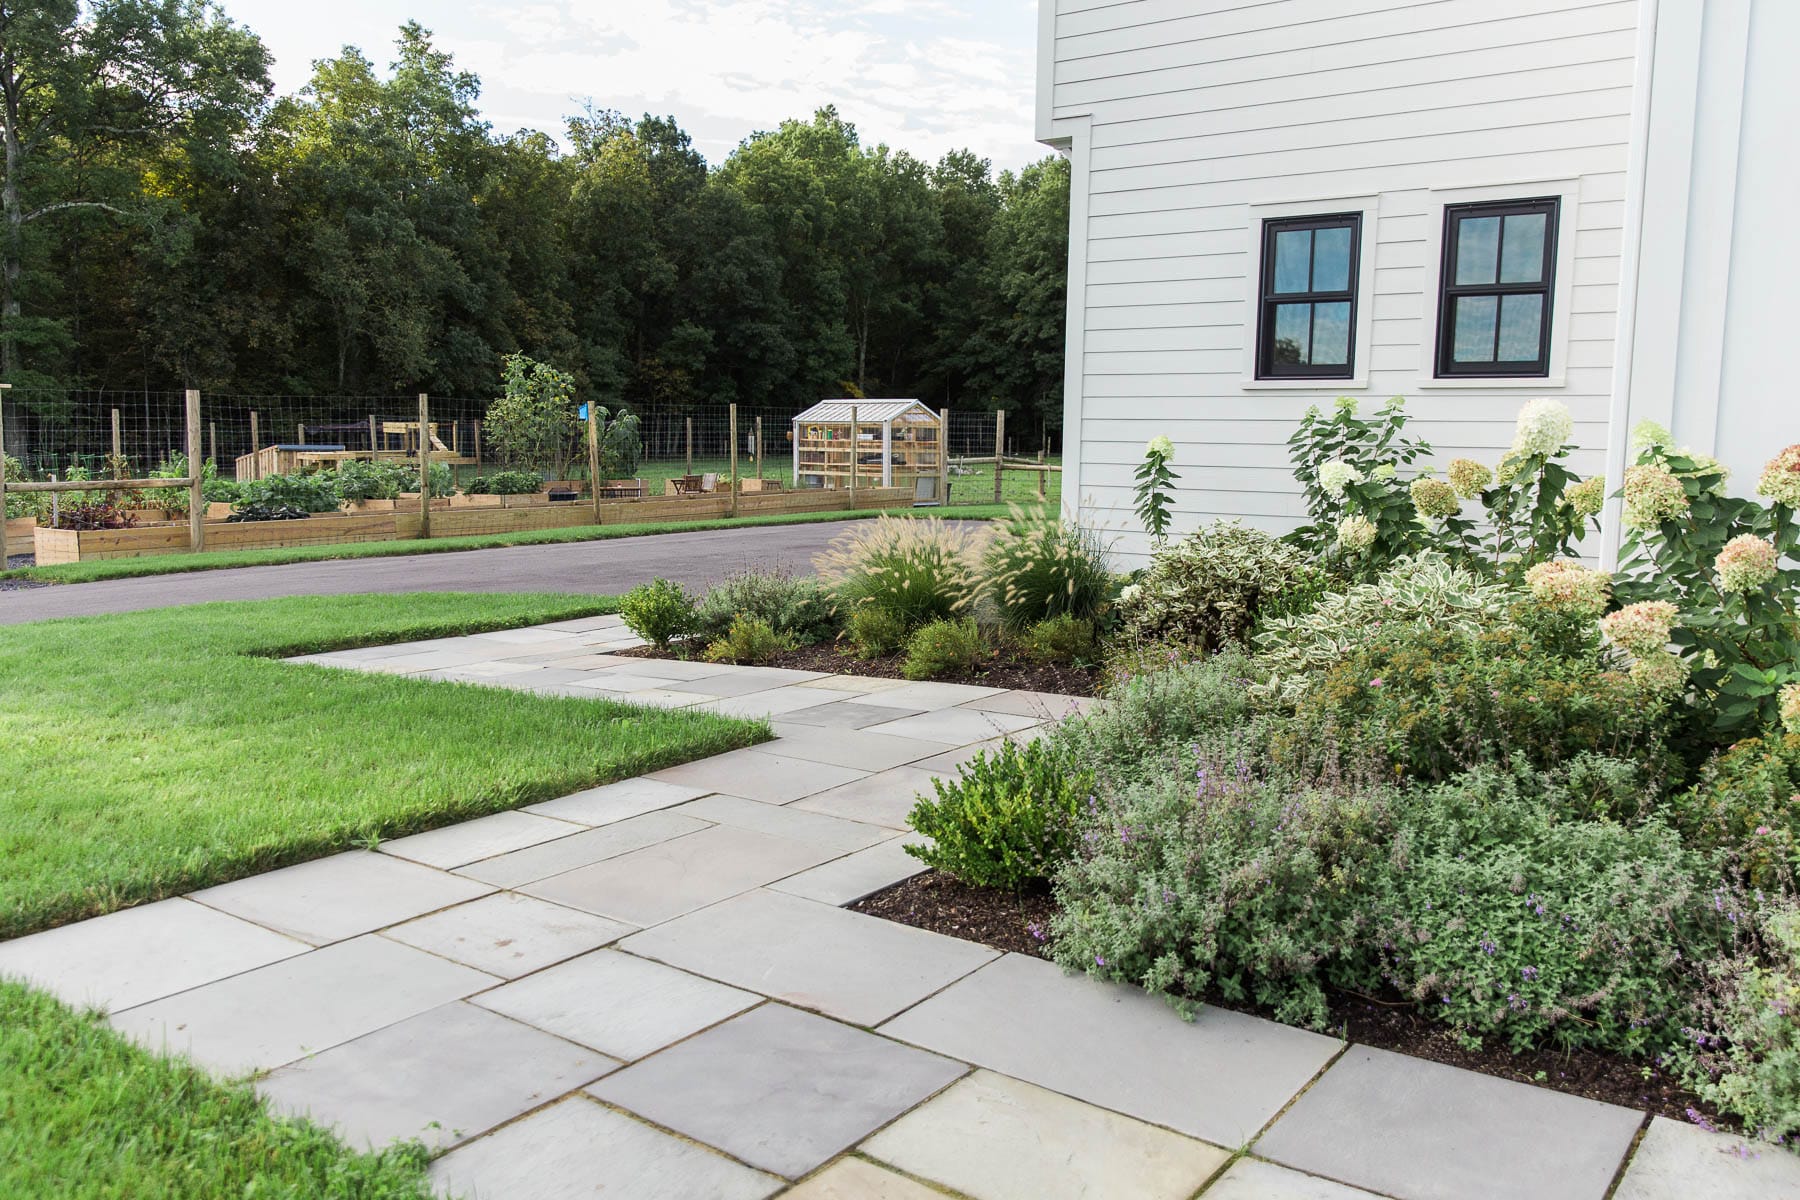 A rectilinear bluestone walkway with native landscape plantings designed by Masseo Landscape, Inc. in Gardiner, NY